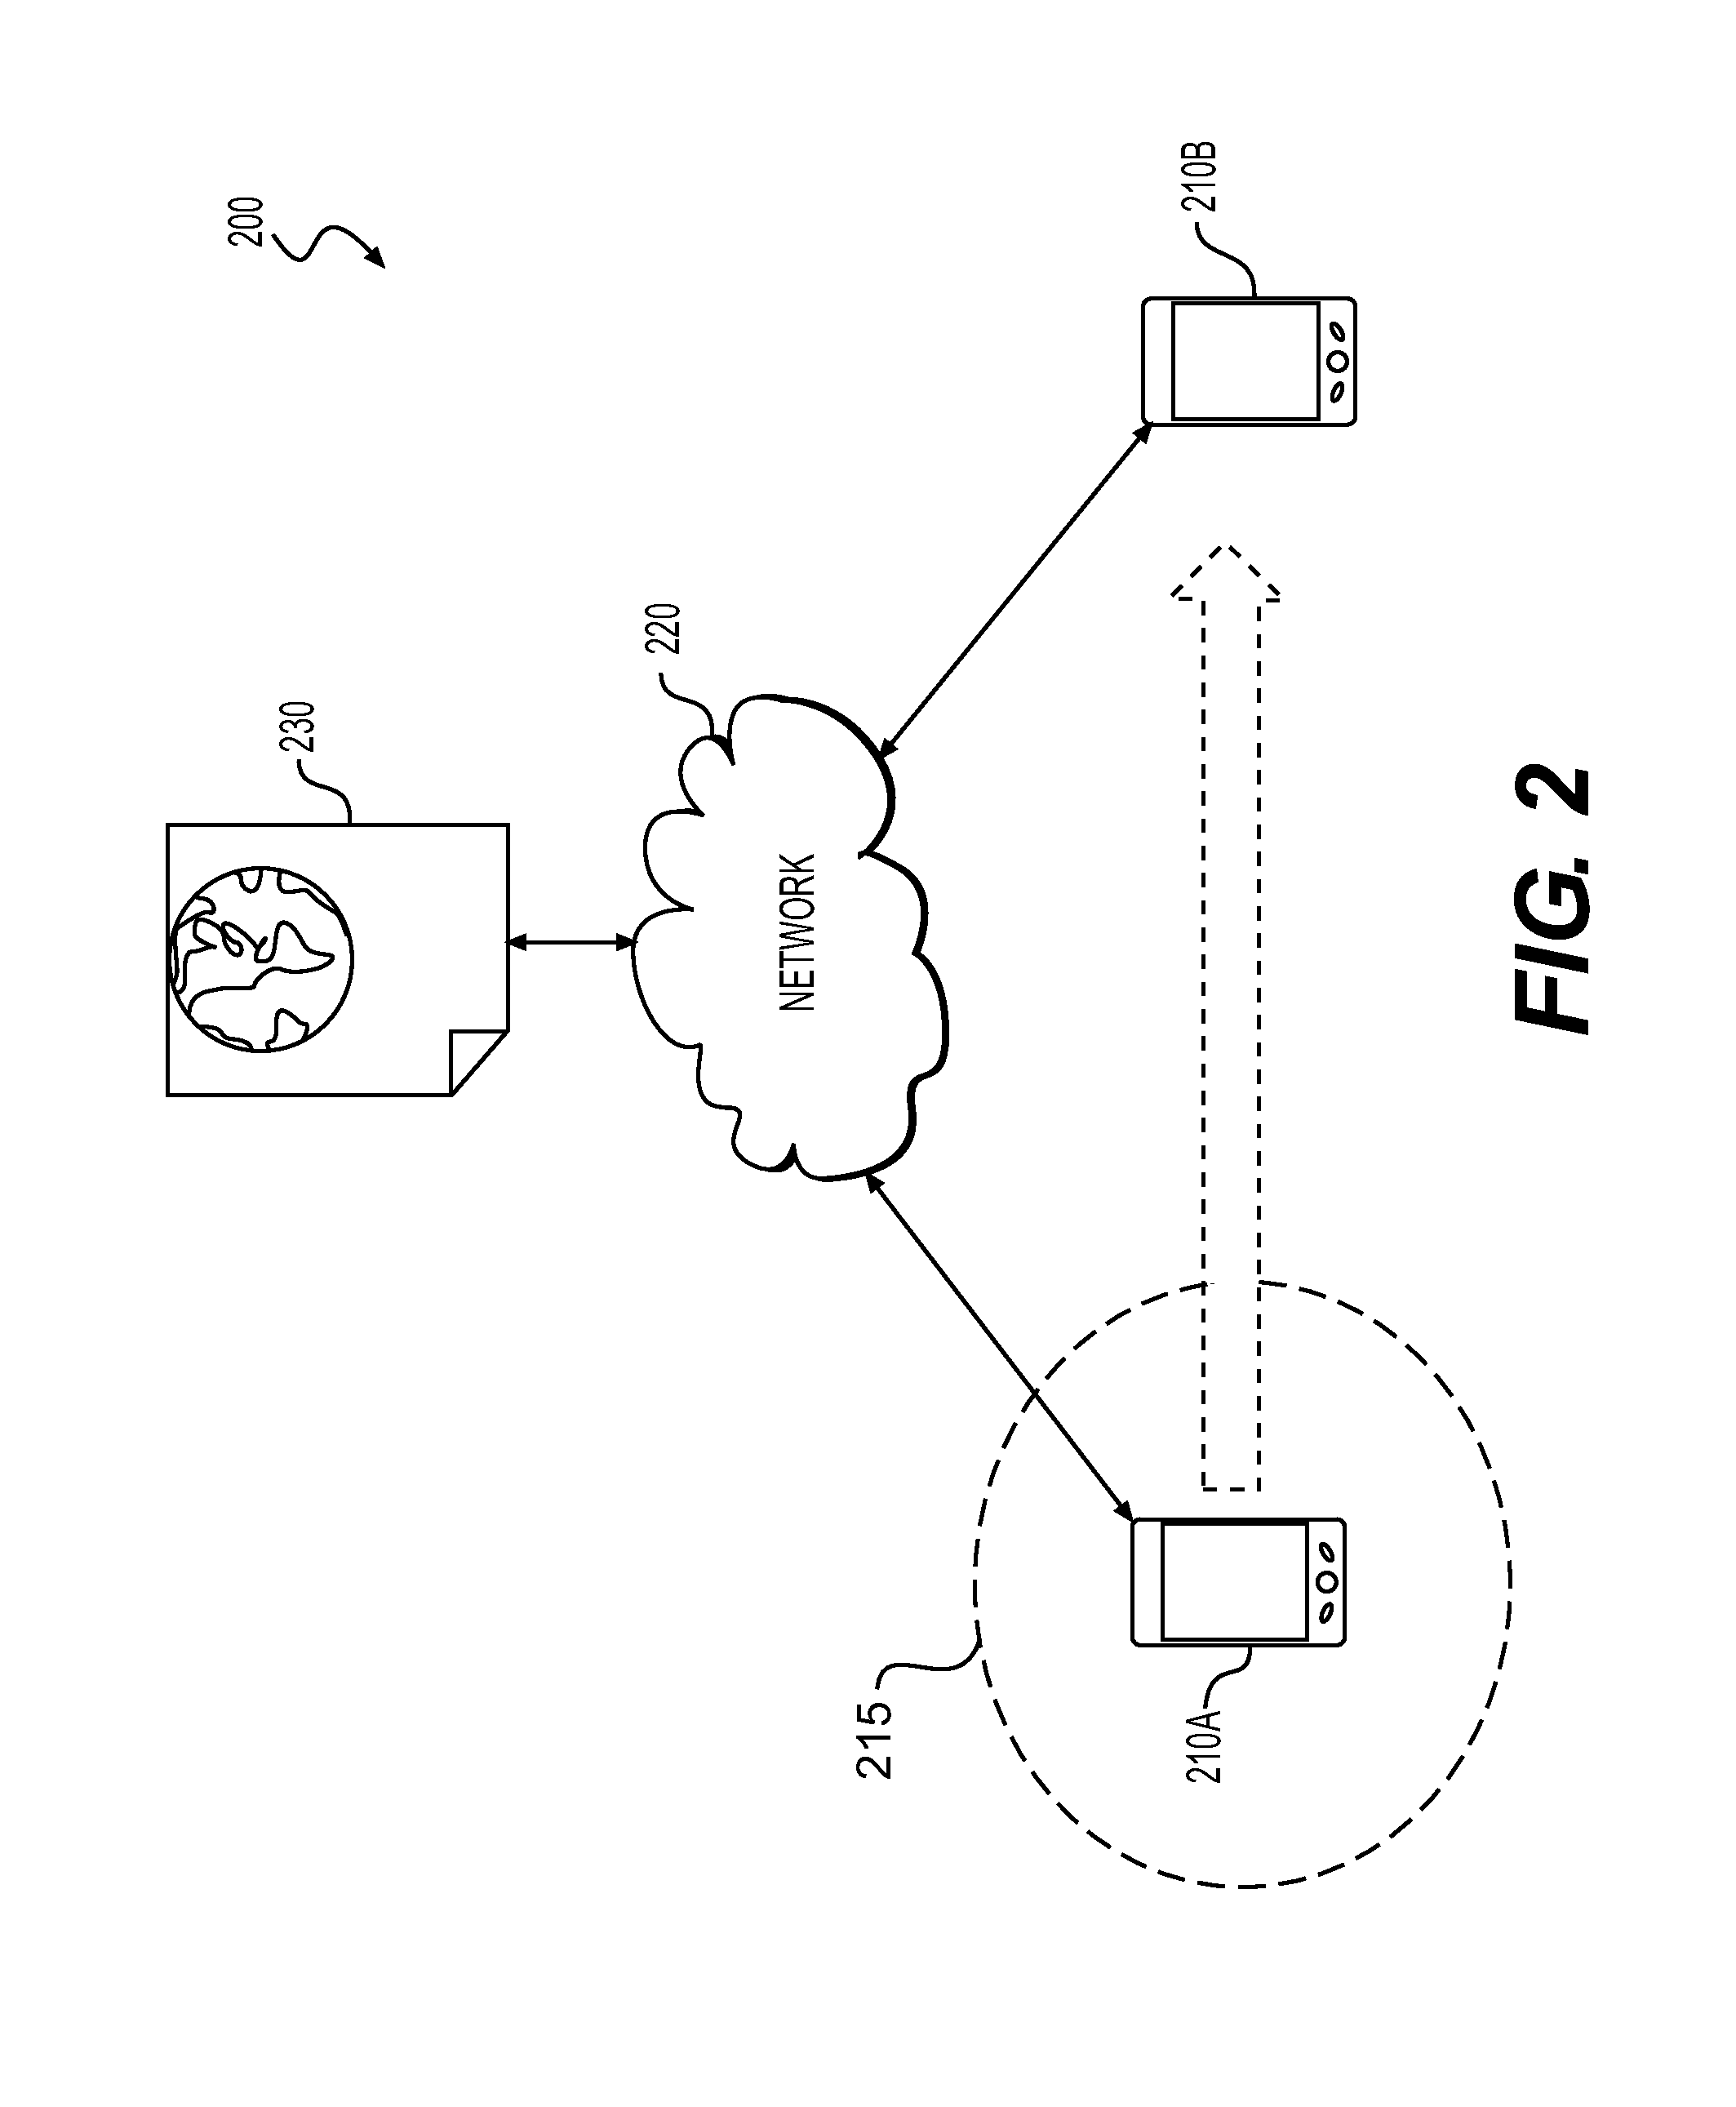 Systems and methods for geolocation-based authentication and authorization